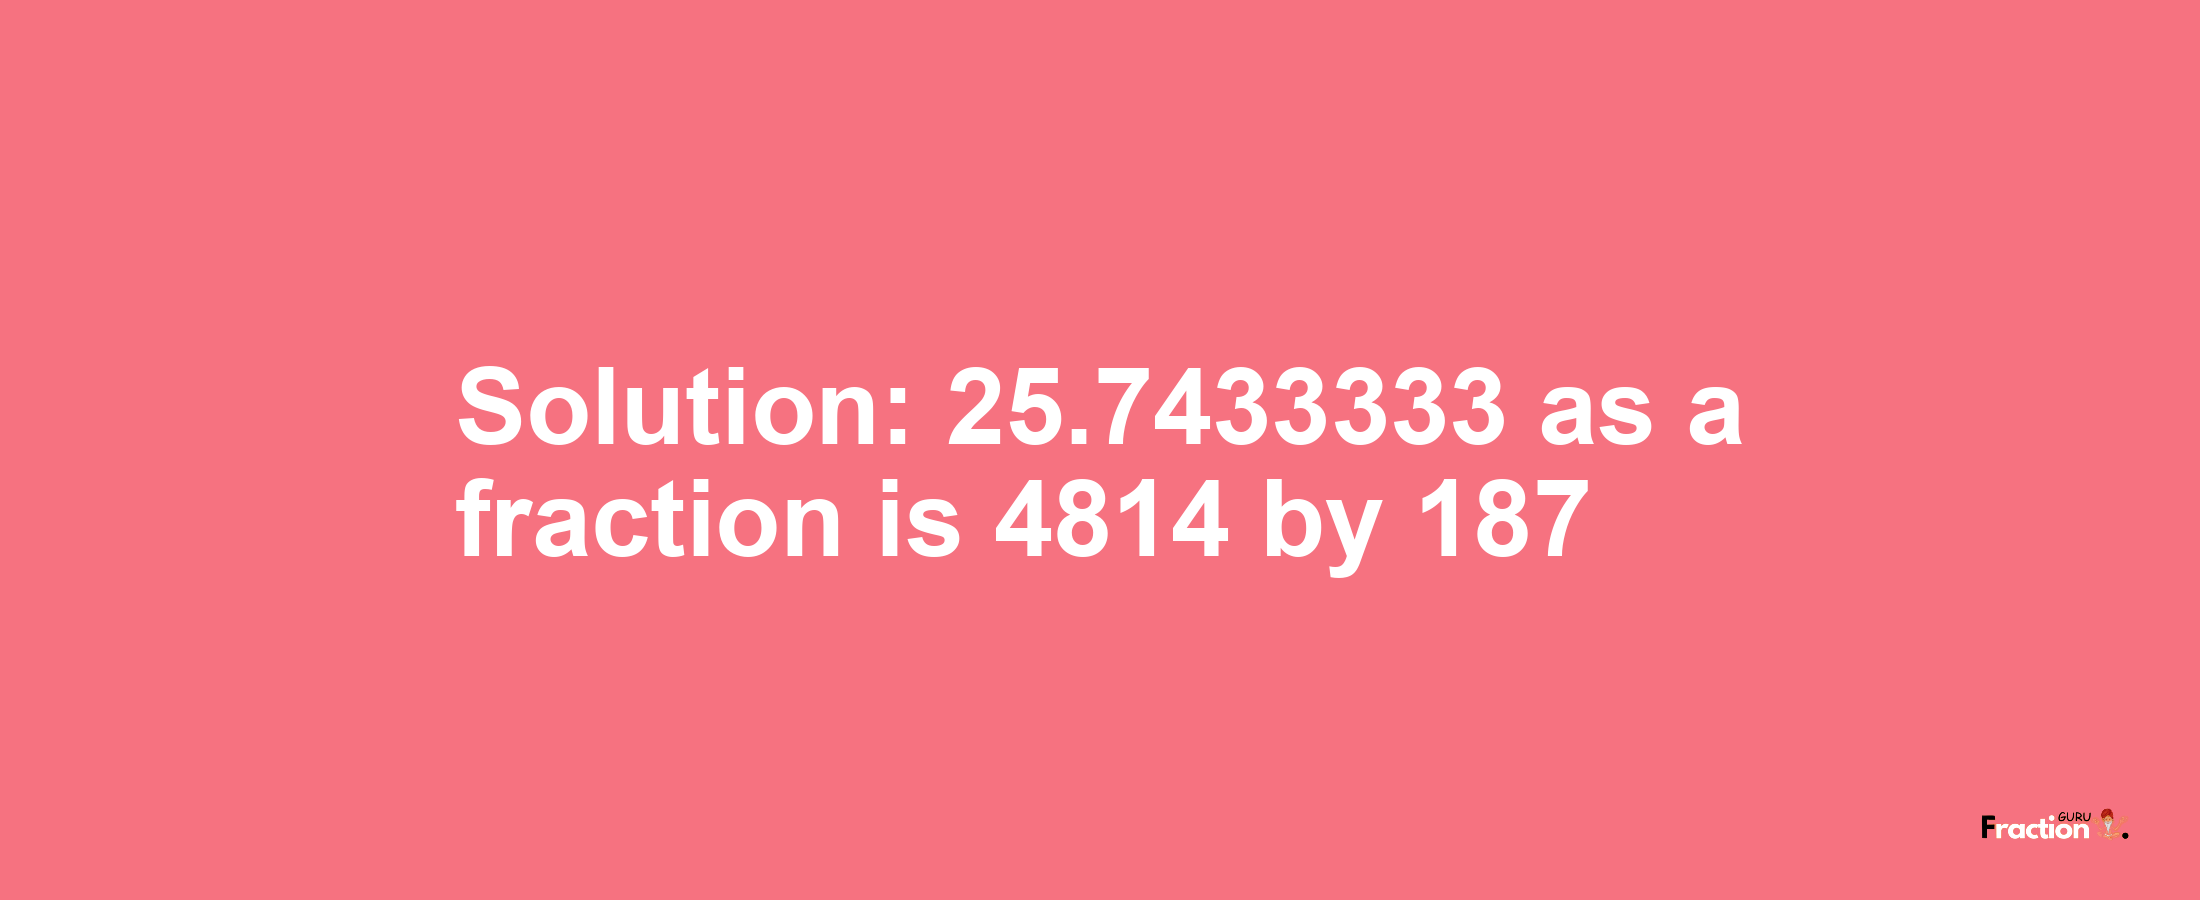 Solution:25.7433333 as a fraction is 4814/187